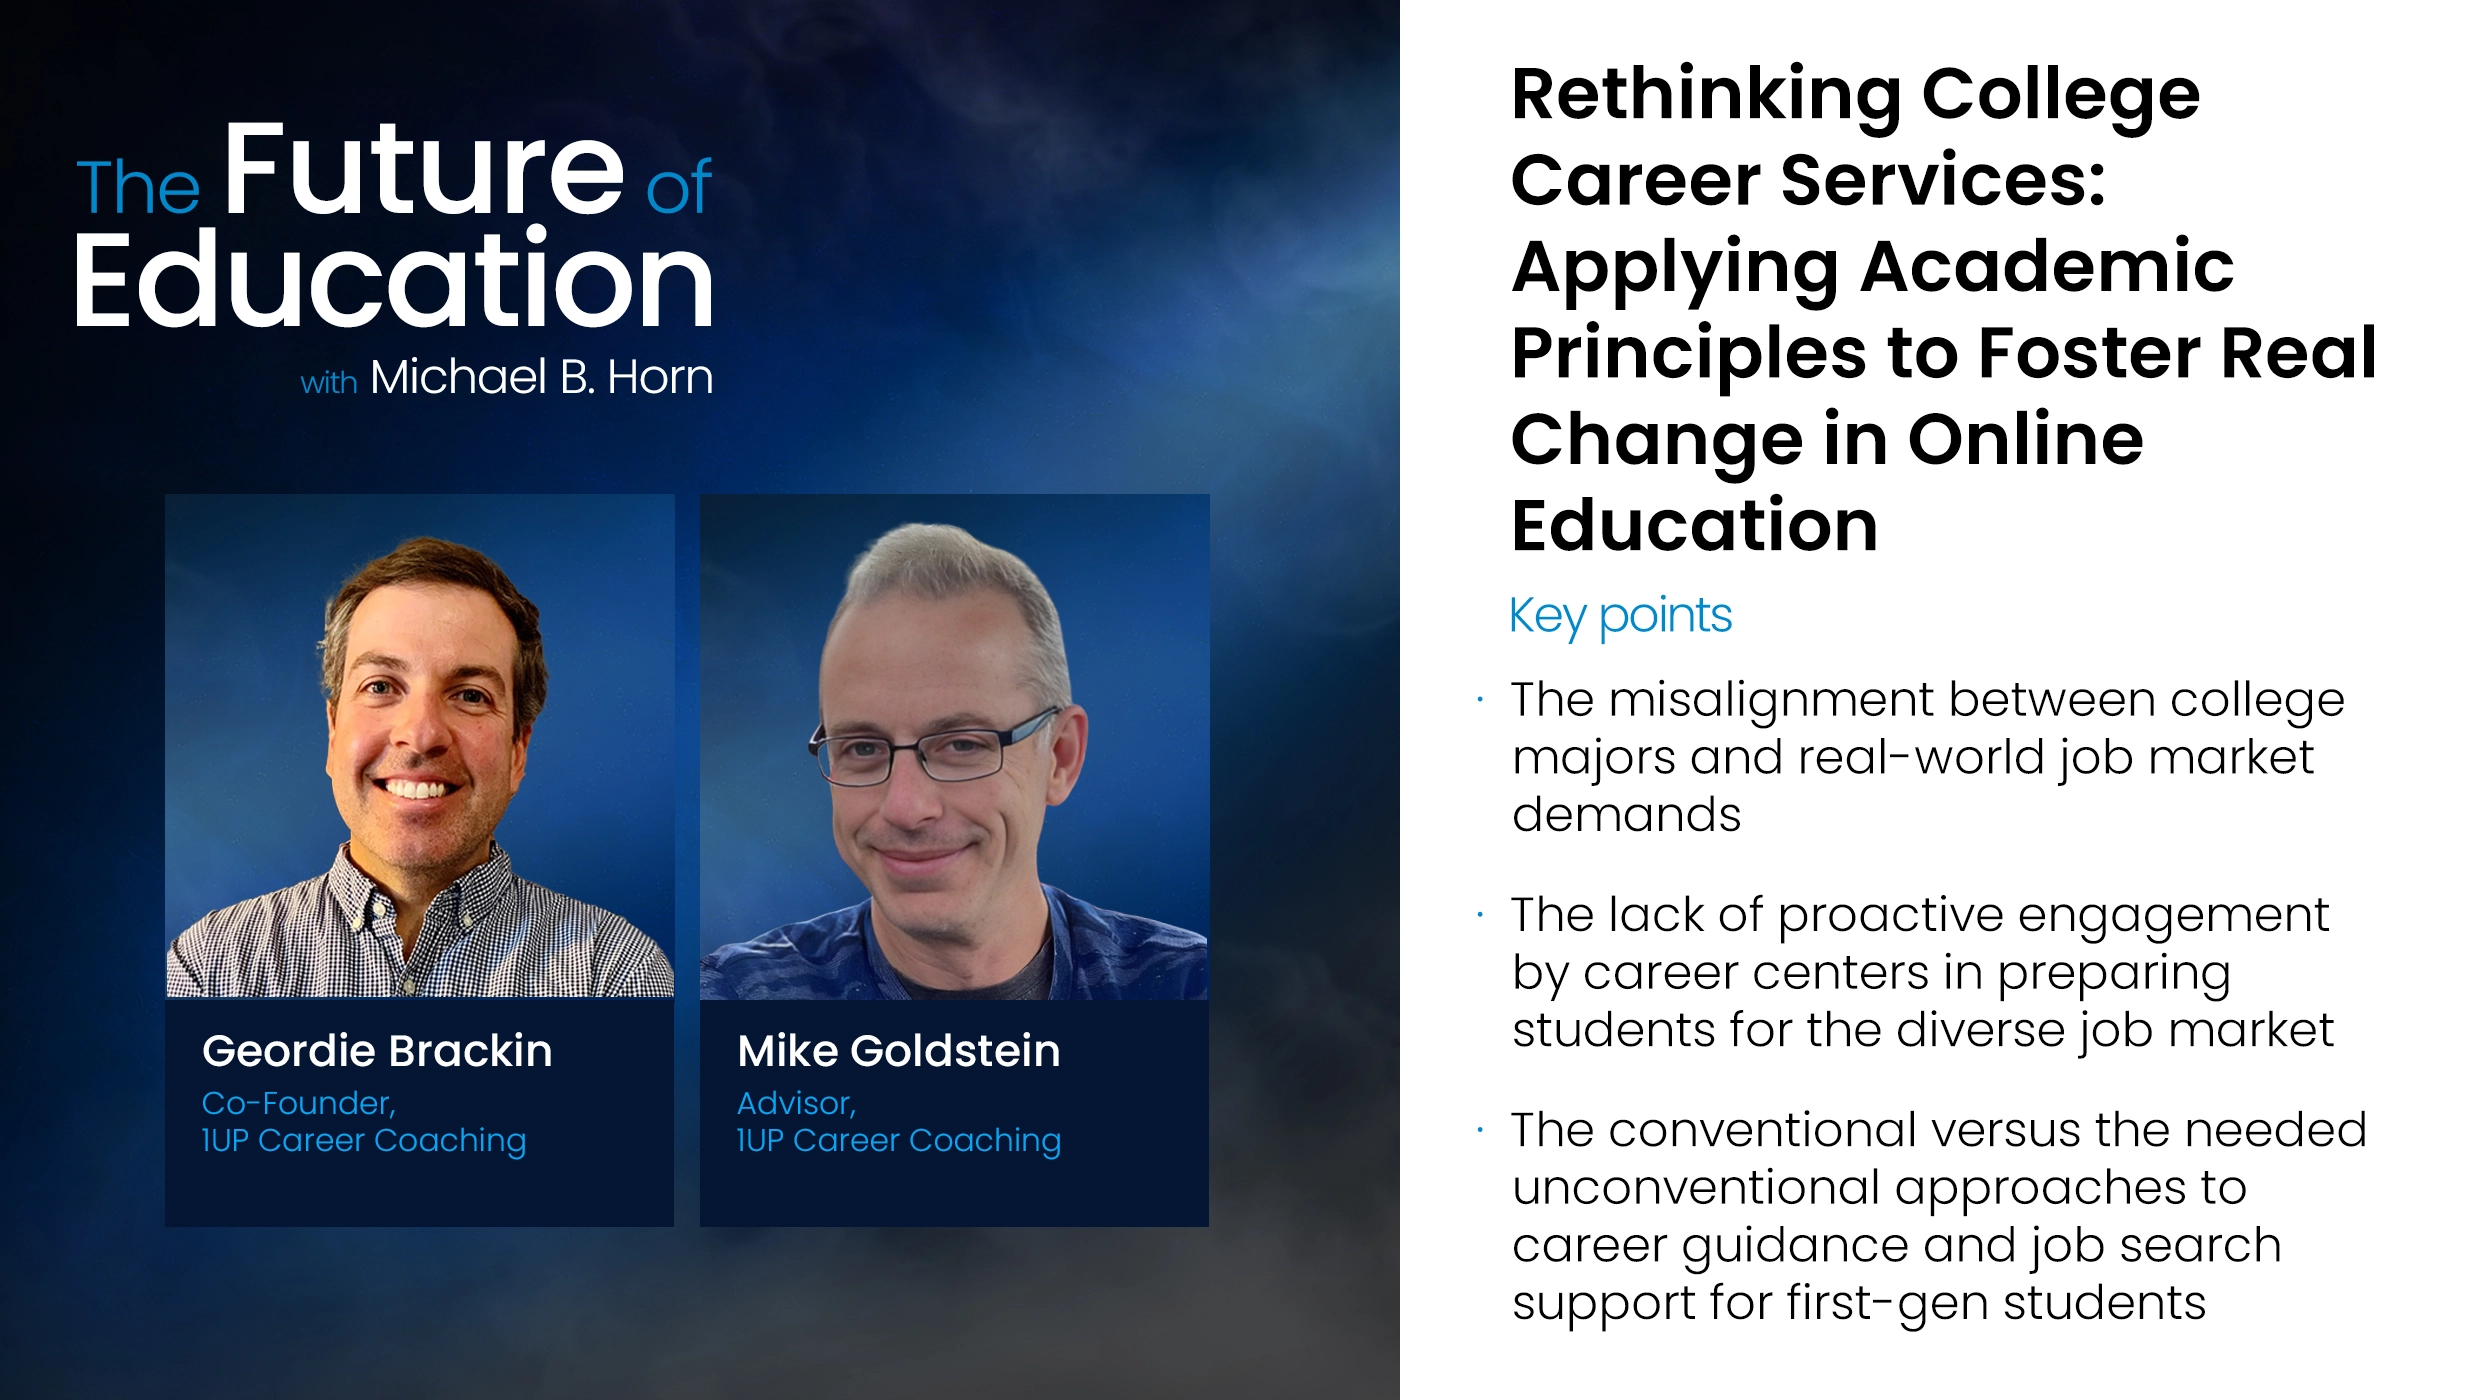 Rethinking College Career Services: Applying Academic Principles to Foster Real Change in Online Education